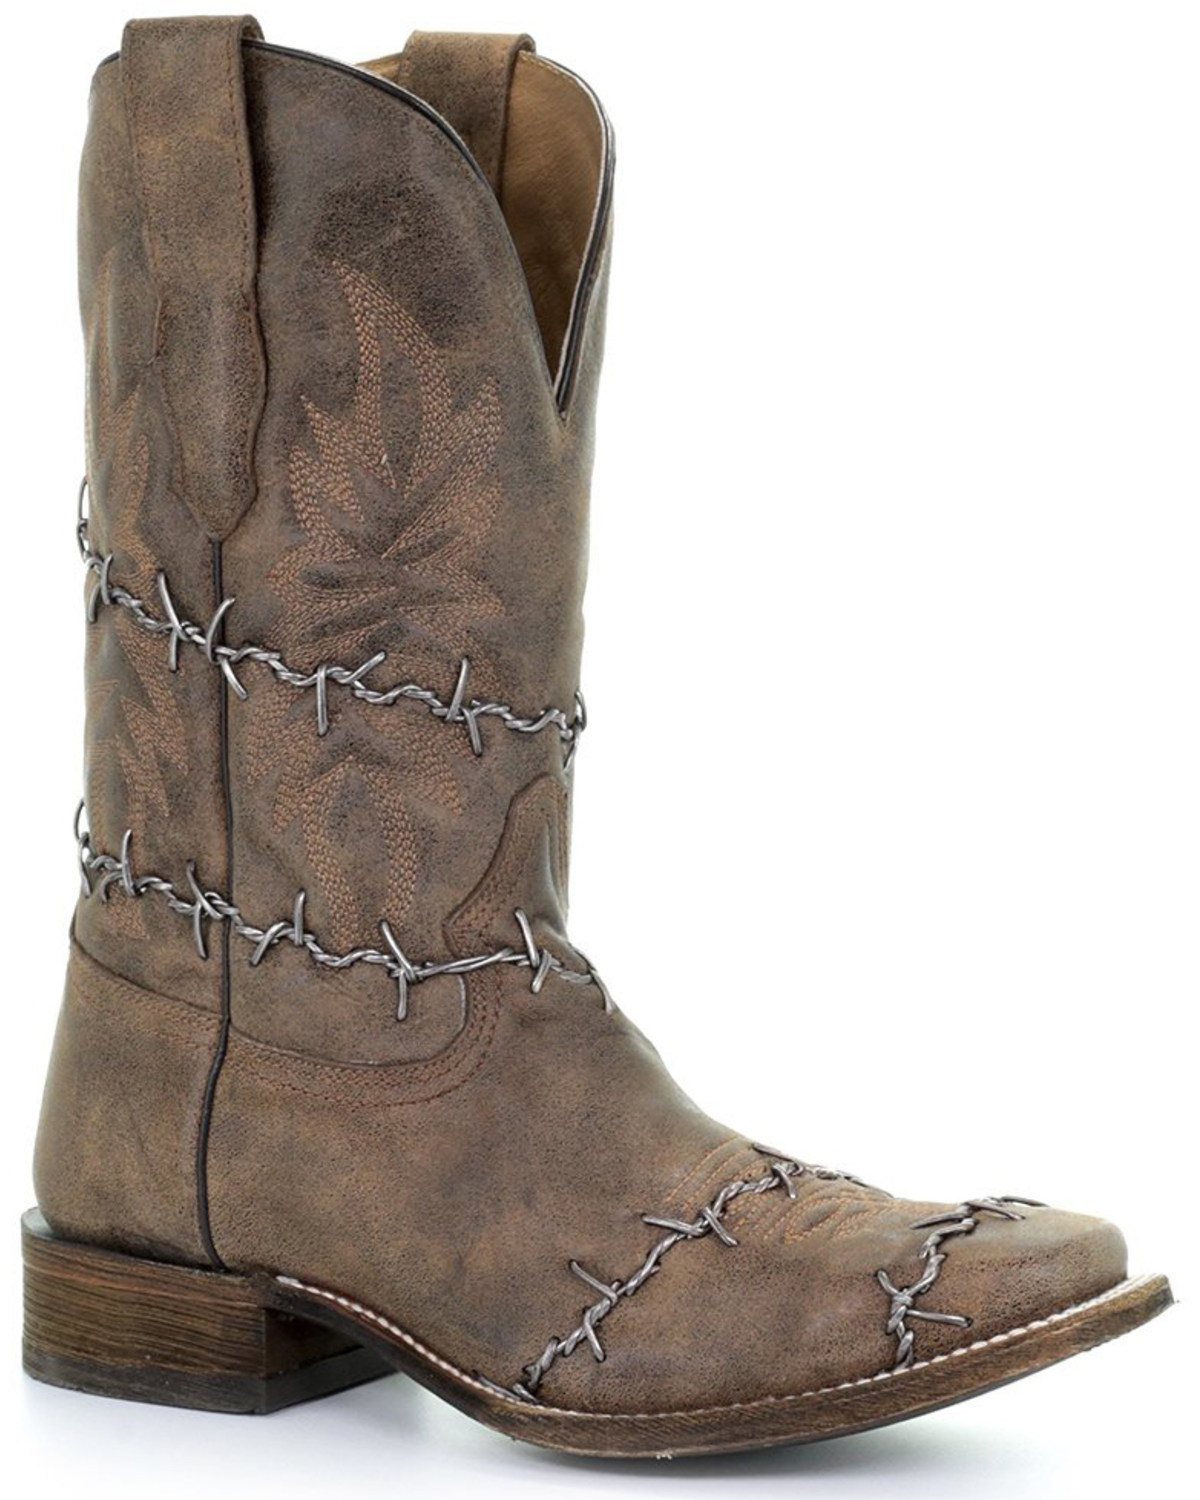 Corral Men's Rustic Brown Western Boots - Square Toe